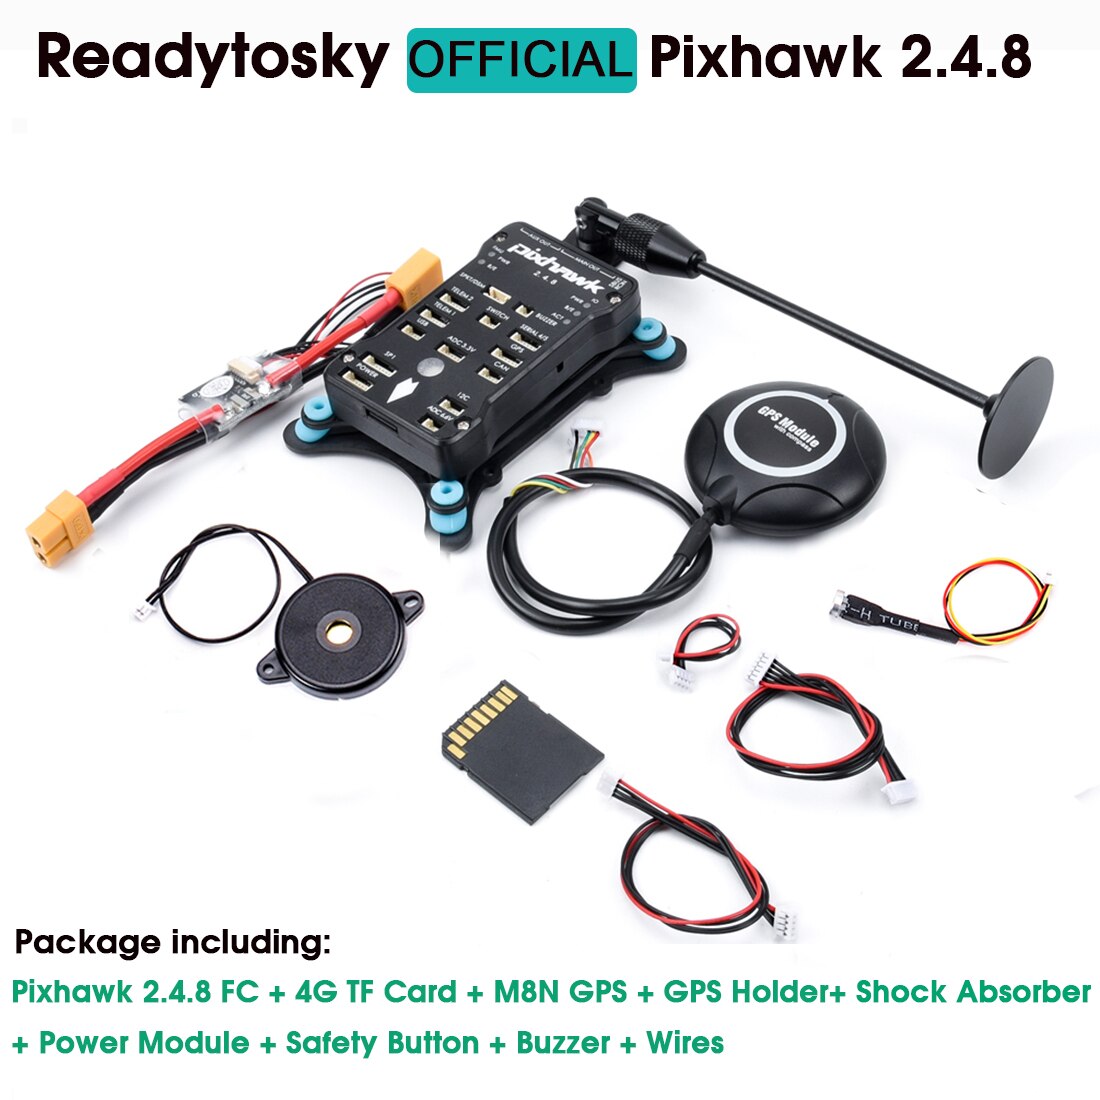 Package includes: Pixhawk 2.4.8 FC + 4G TF Card MBN GPS GPS